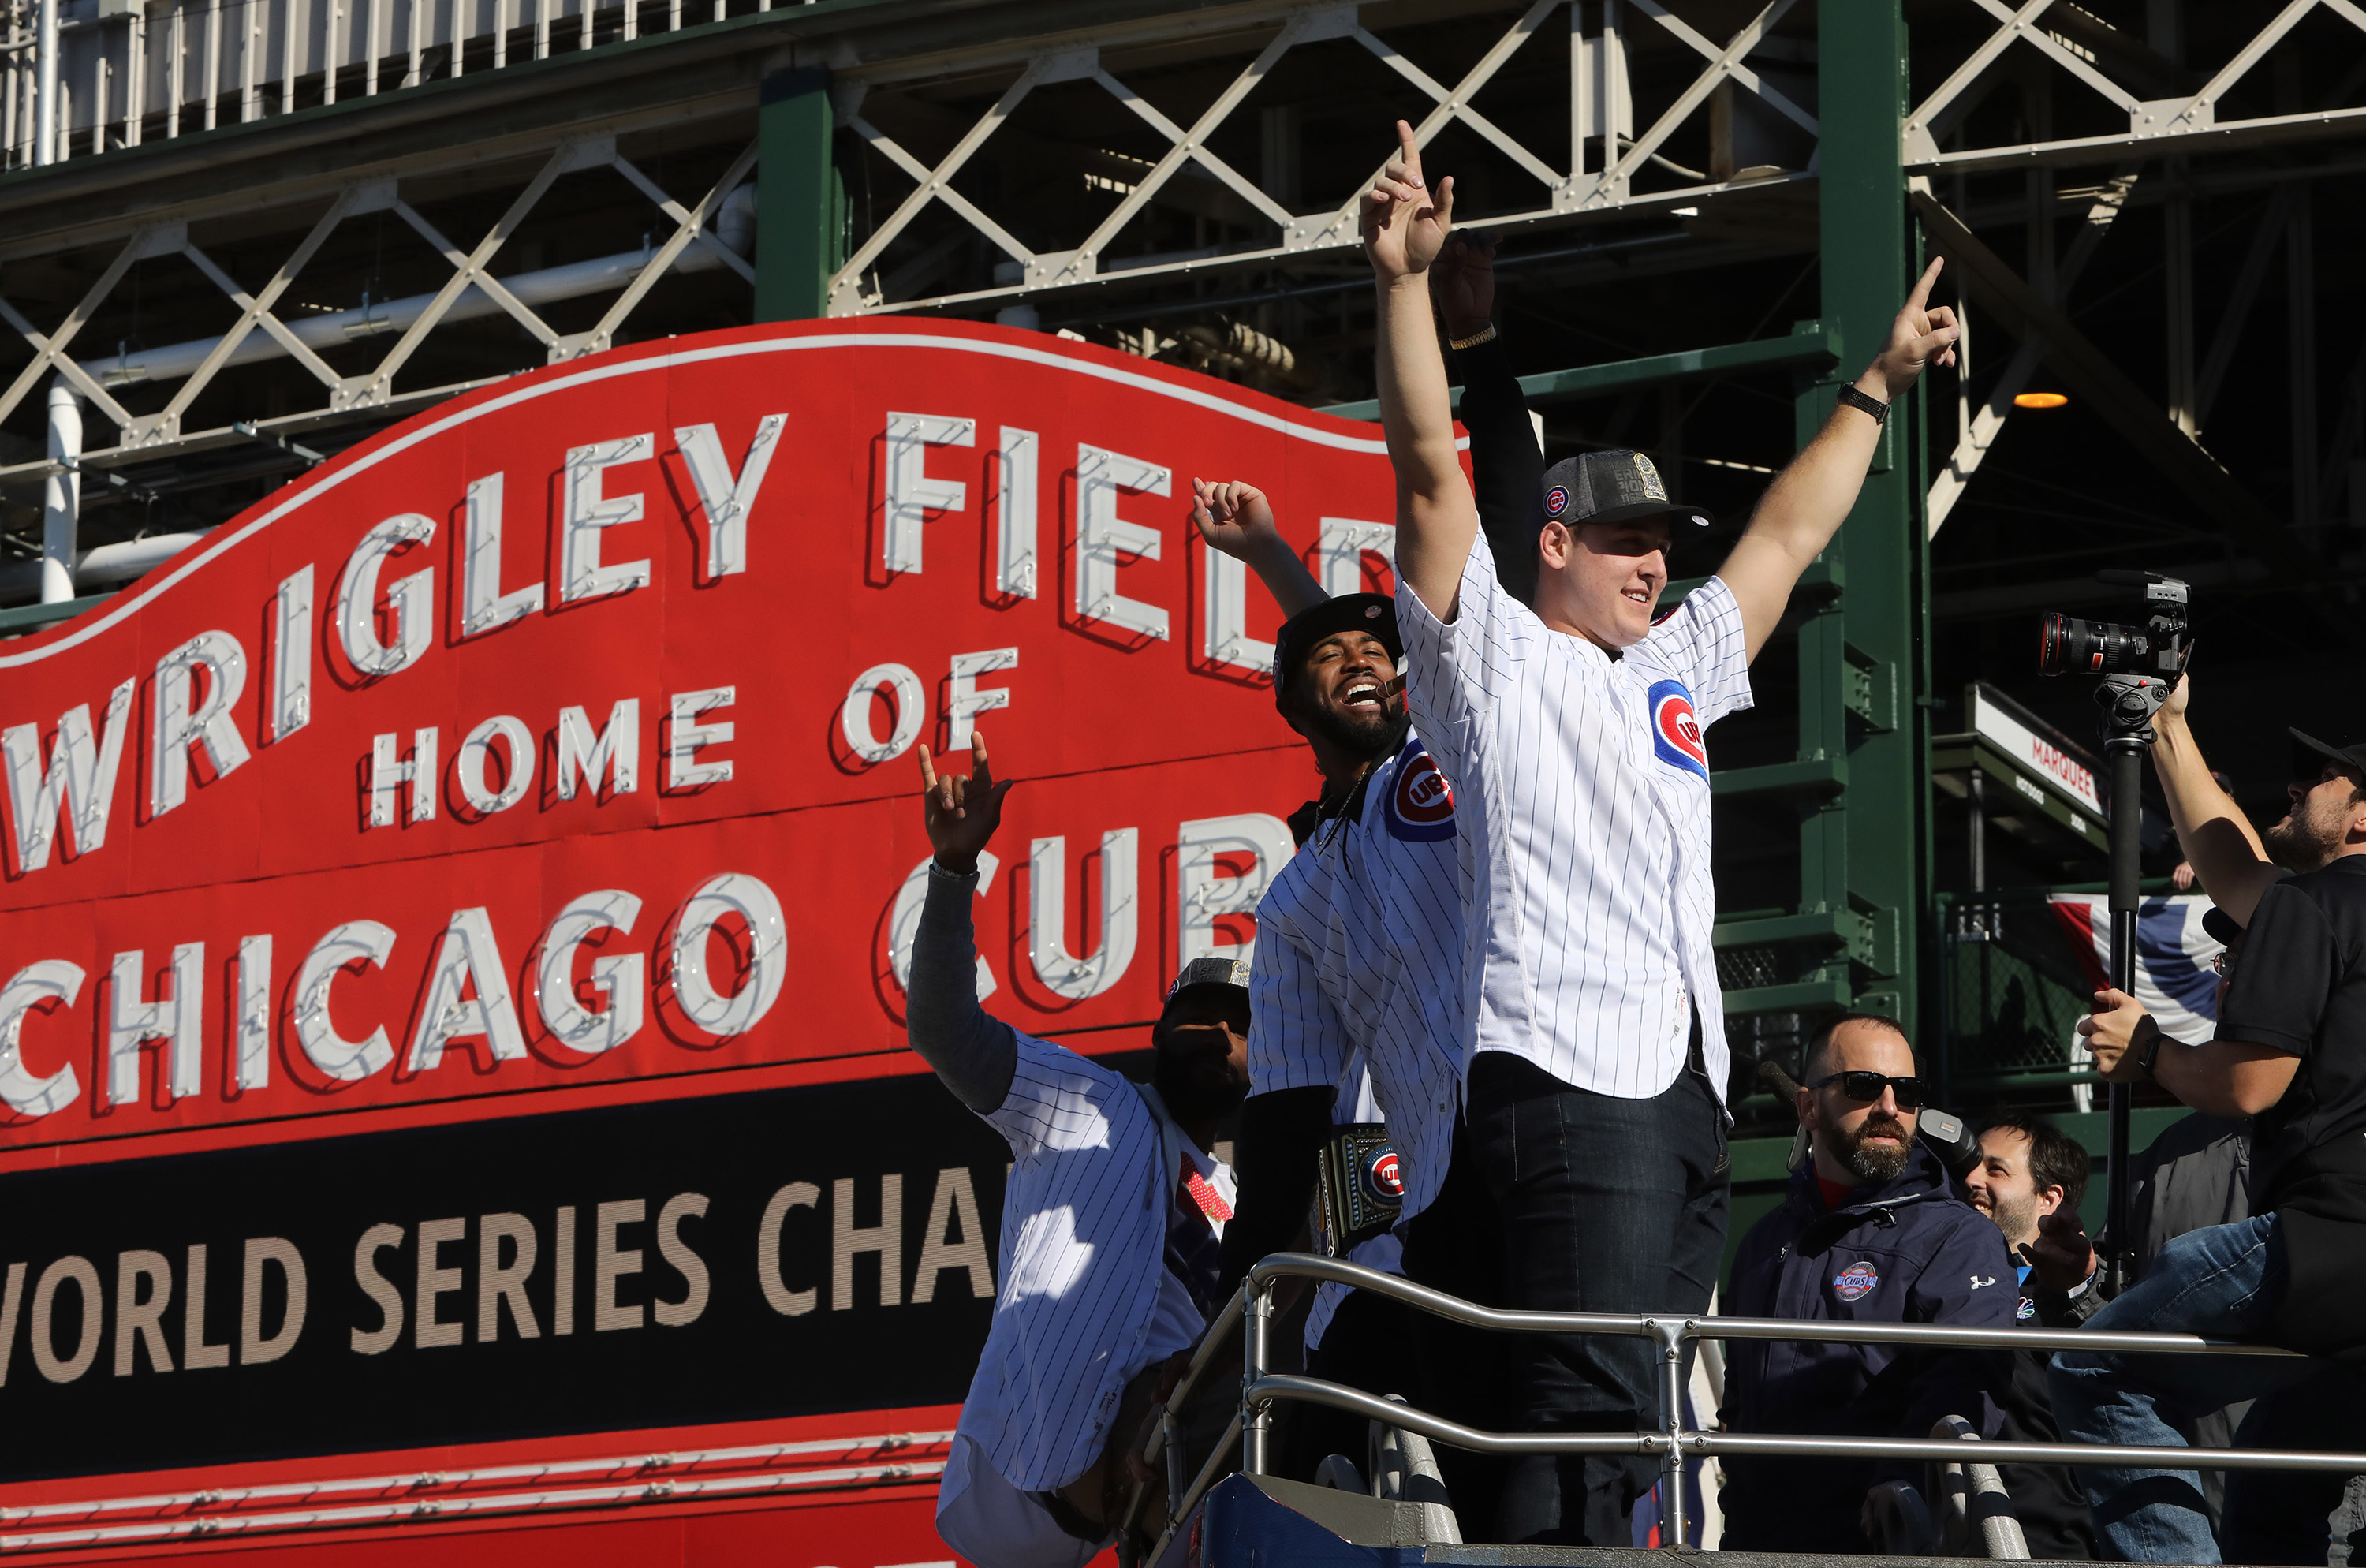 Chicago Cubs Anthony Rizzo along with teammates family, staff and friends roll pass in a double decker bus past the iconic Wrigley Field Chicago Cubs marque during the parade honoring the World Series Champion Chicago Cubs, Friday, Nov. 4, 2016. (Antonio Perez/Chicago Tribune/TNS)